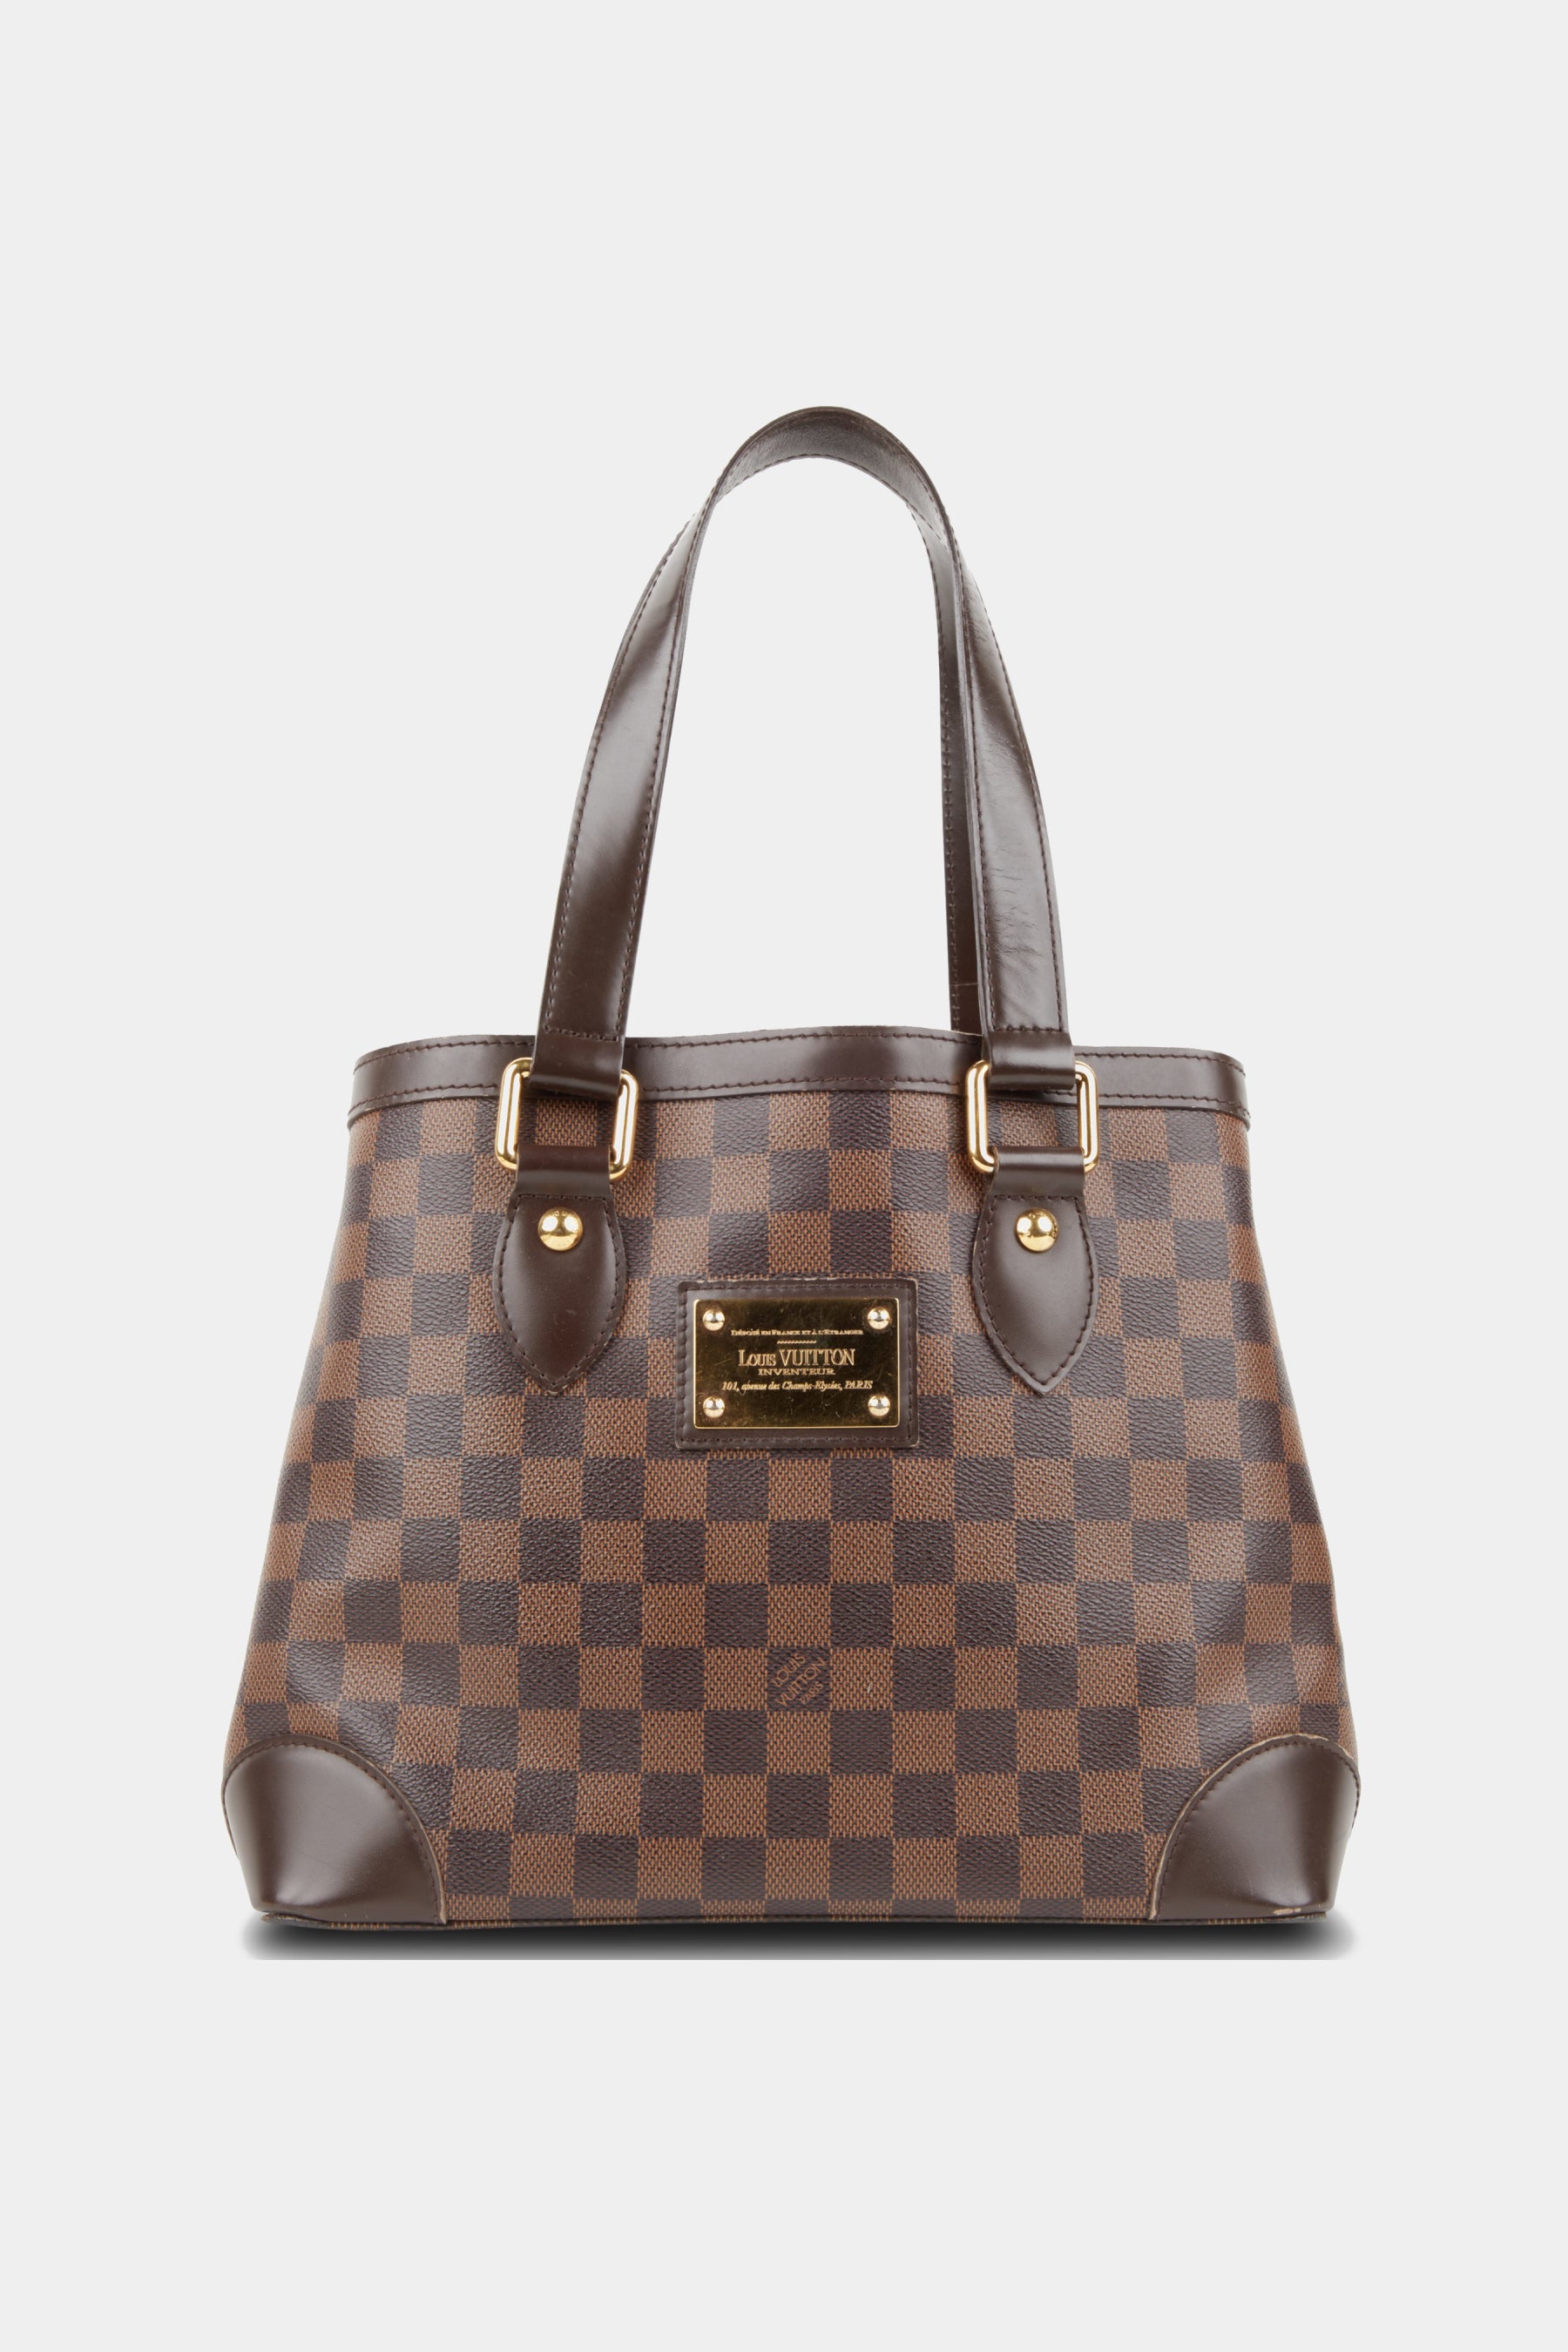 Louis Vuitton Monogram Neverfull MM Tote great use condition!!! retail  1,700 